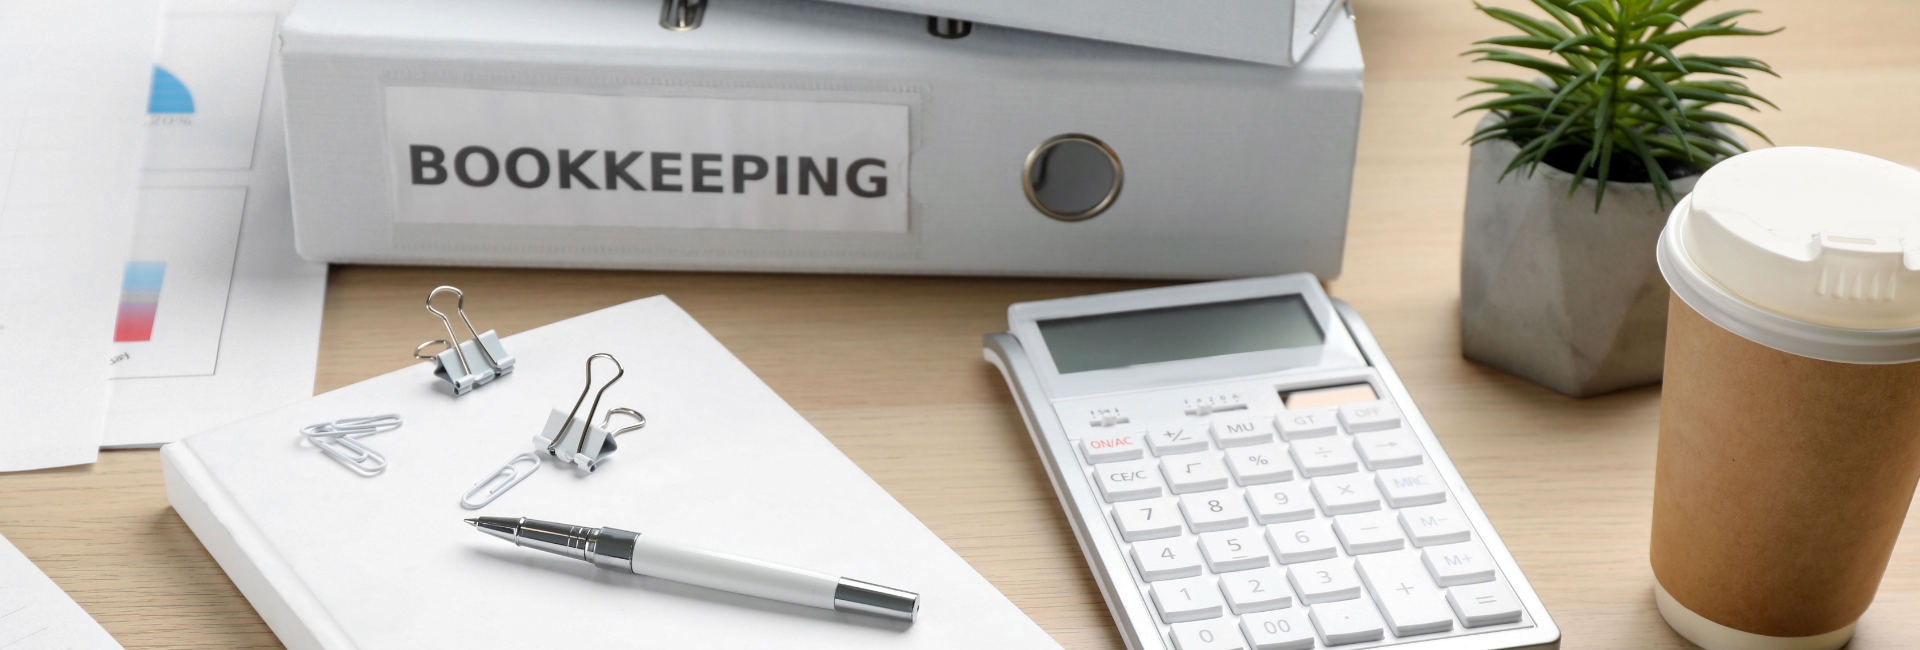 bookkeeping-and-accounting-solutions-banner-bg